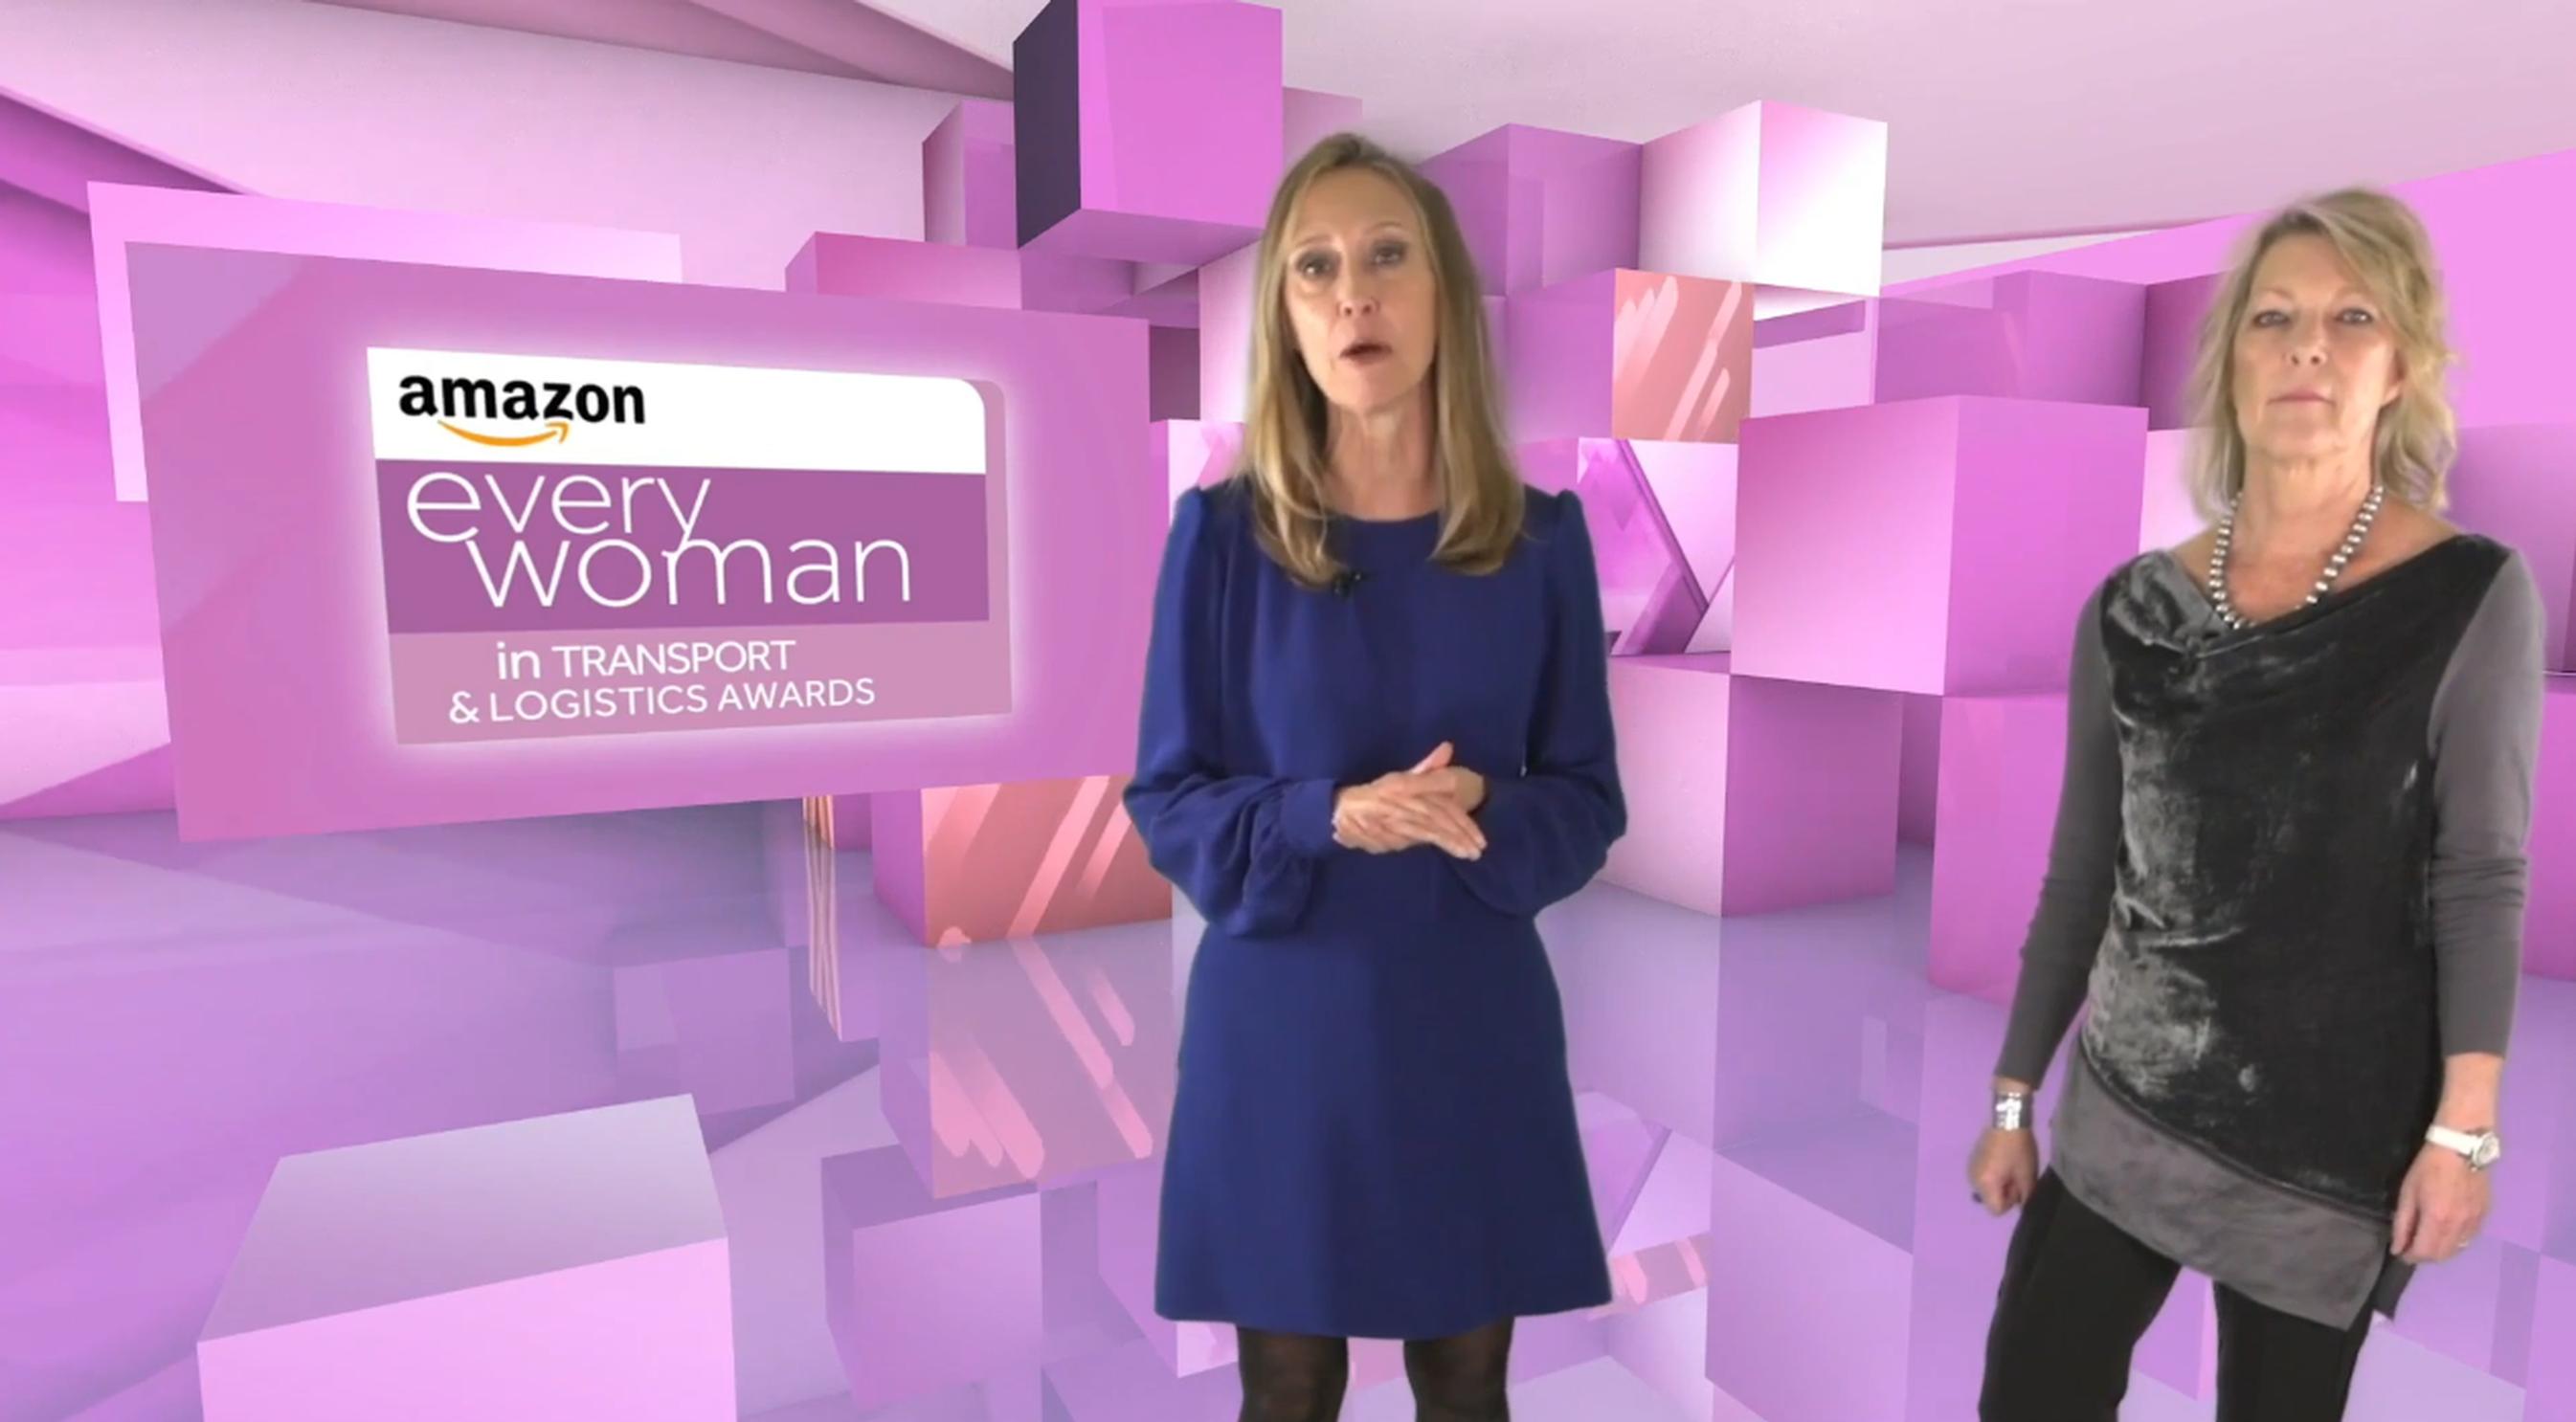 Maxine Benson MBE and Karen Gill, co-founders of everywoman, presented the virtual awards ceremony